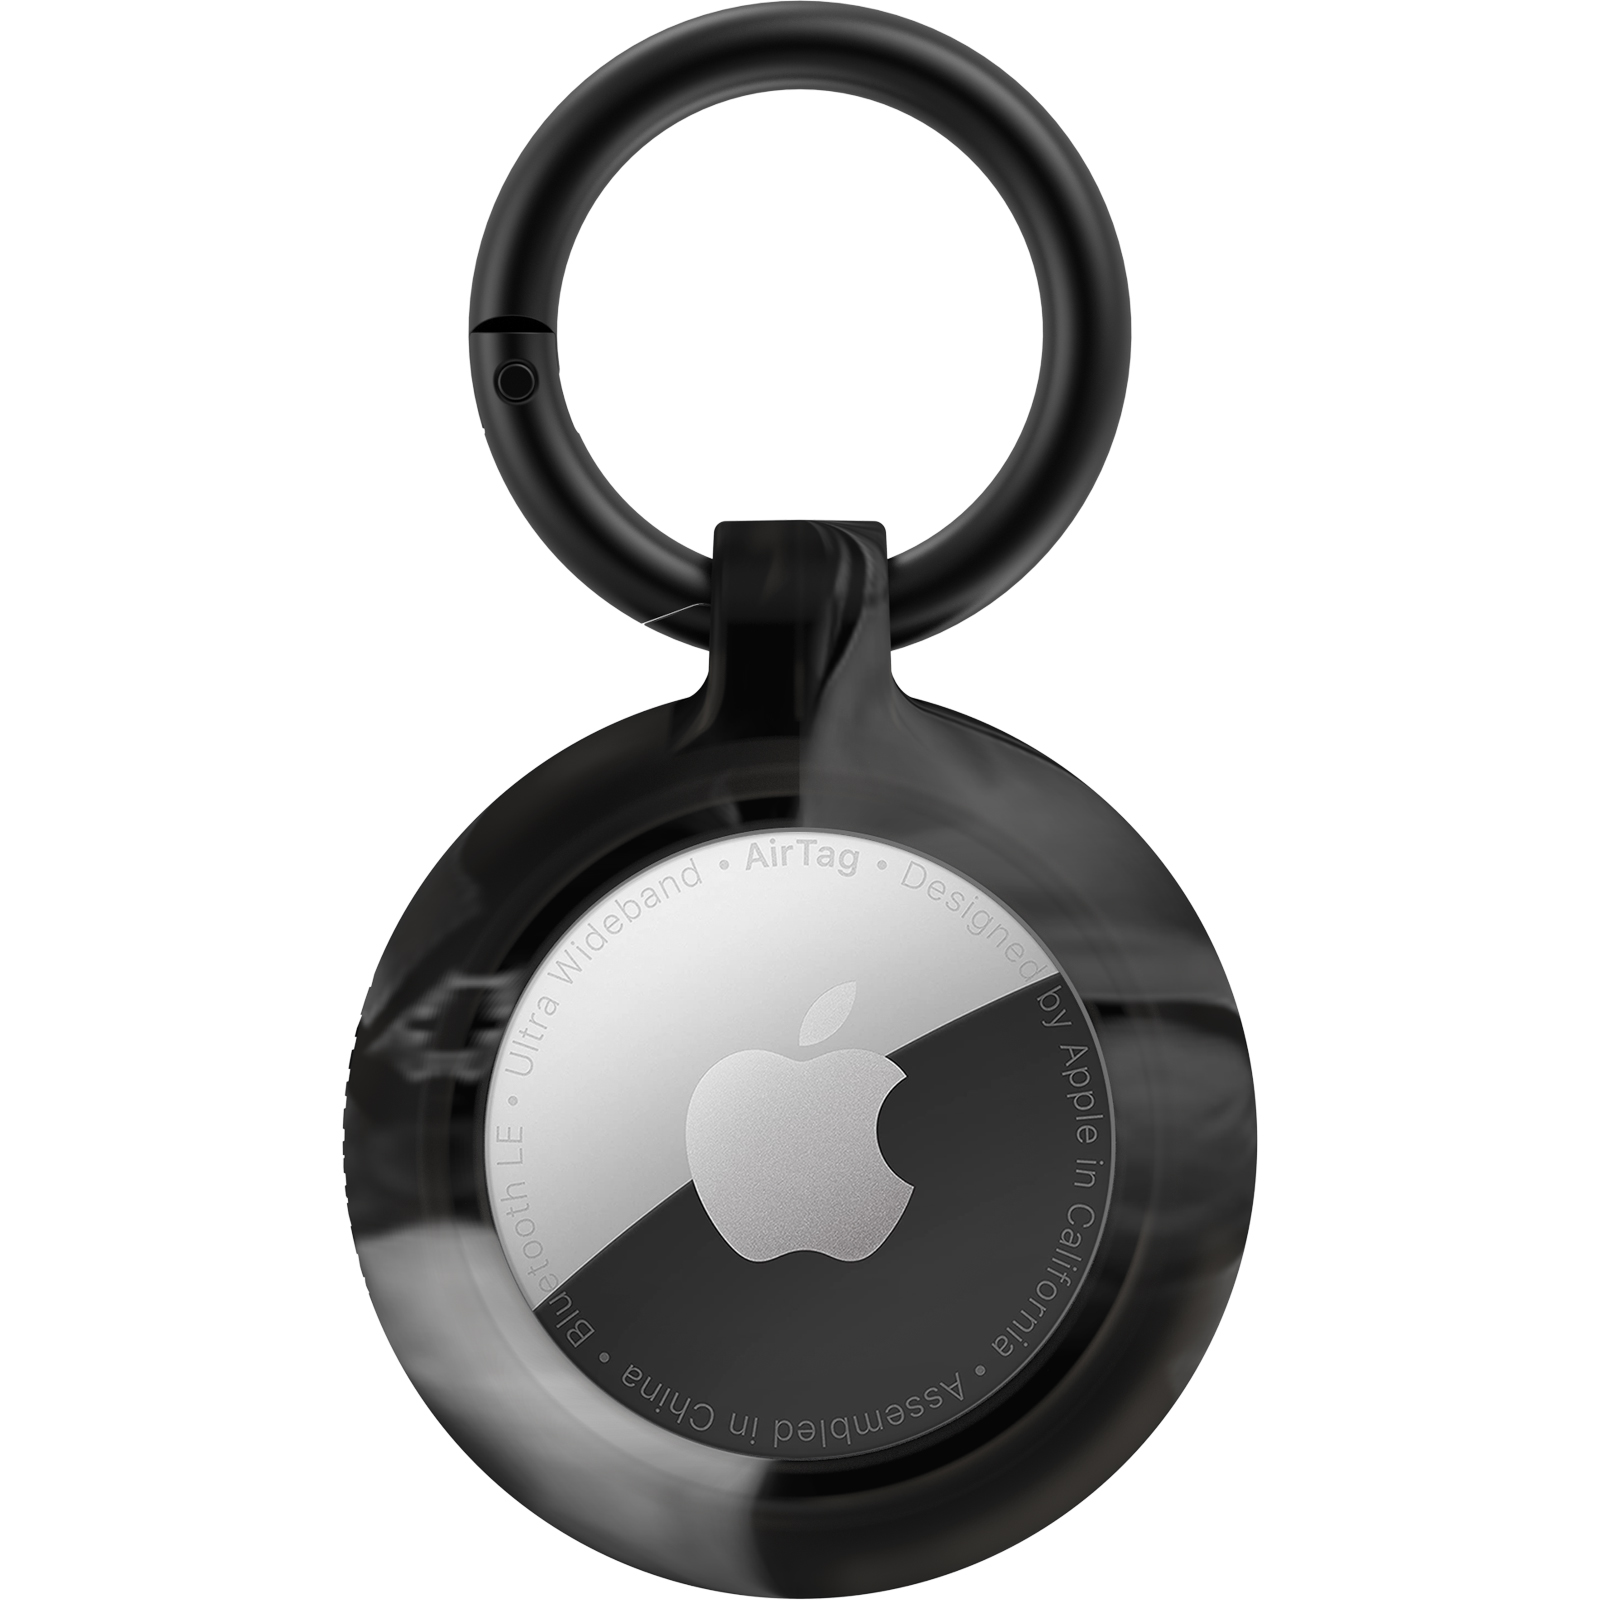 Apple AirTags are on sale for up to 20% off